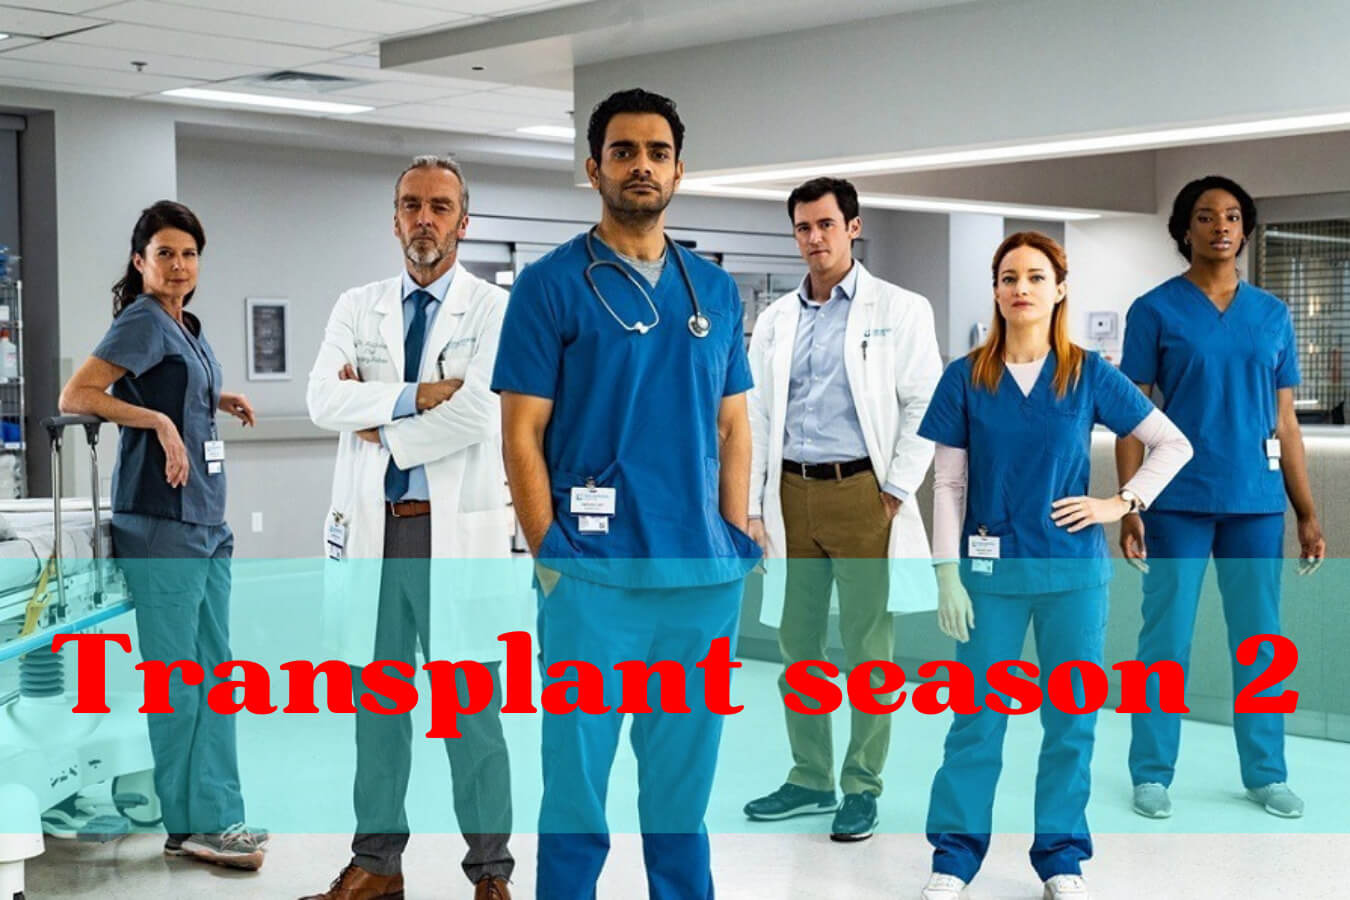 Is There Any News Of Transplant Season 2 Trailer?